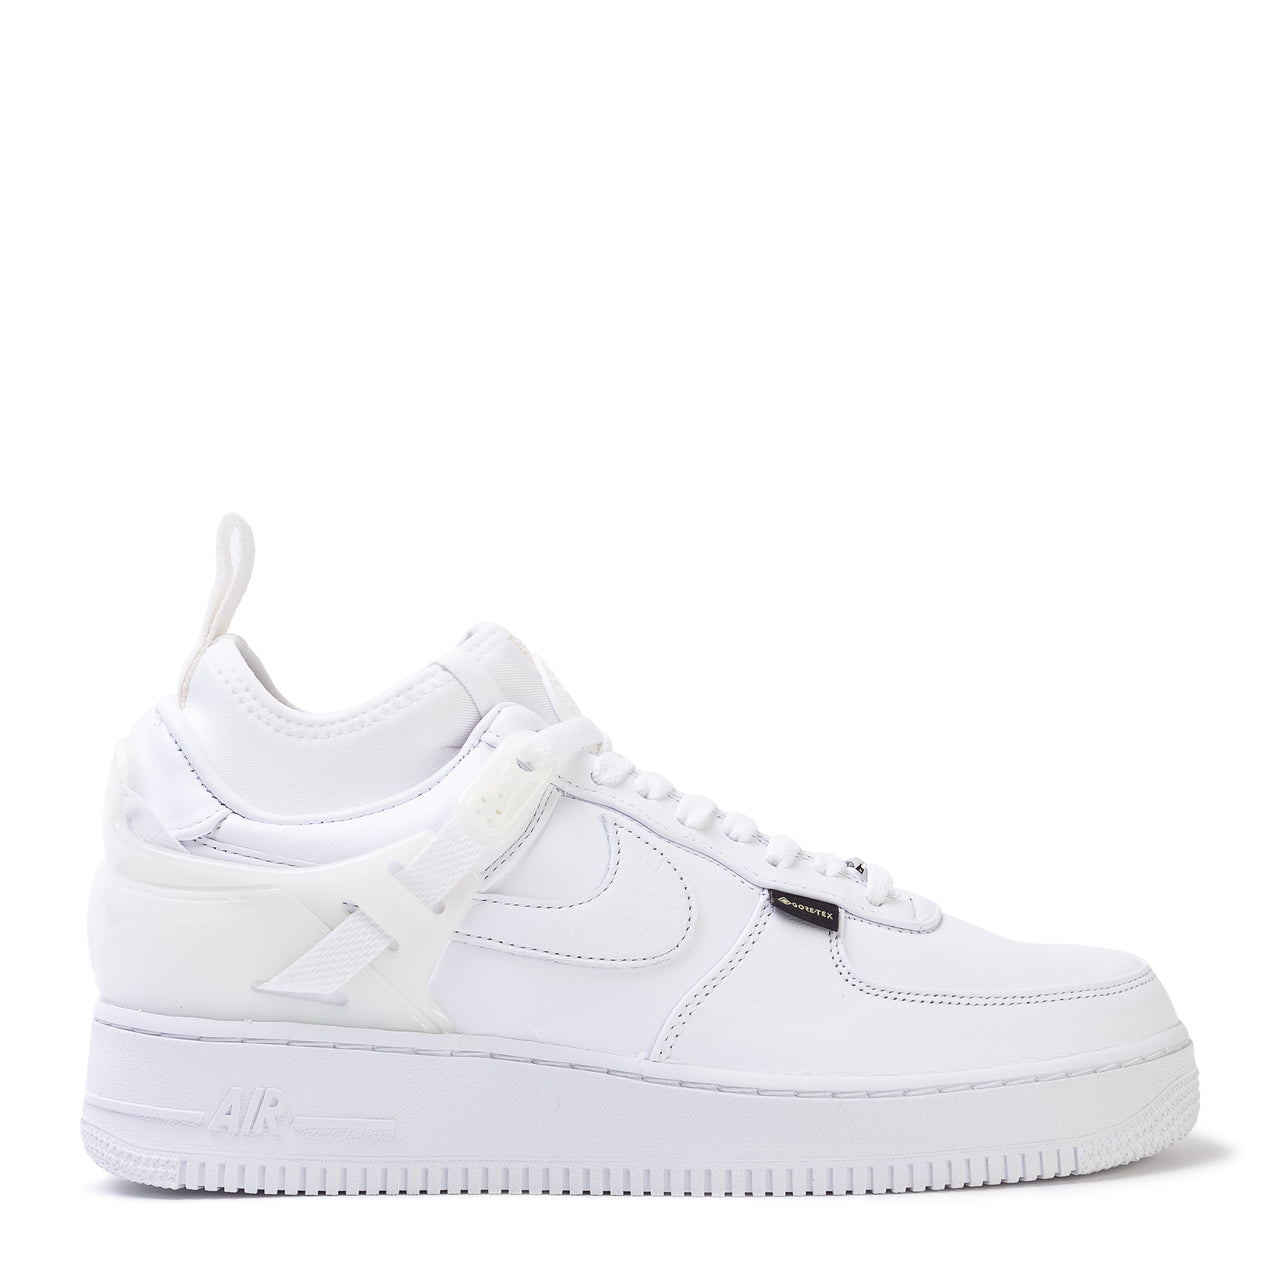 AIR FORCE 1 LOW SP GORE-TEX / UNDERCOVER